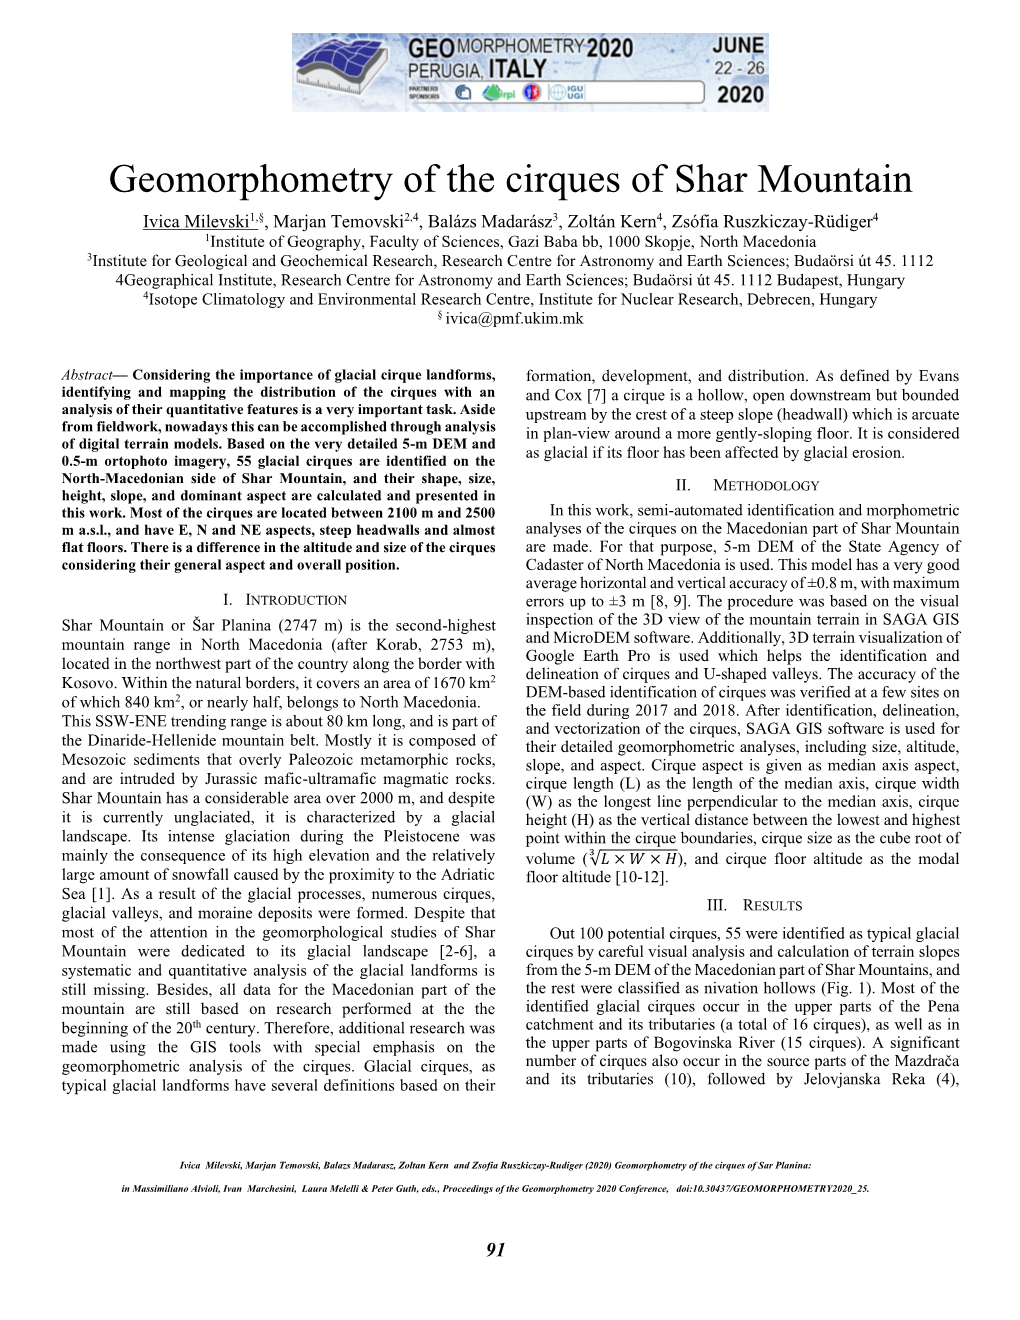 Geomorphometry of the Cirques of Shar Mountain